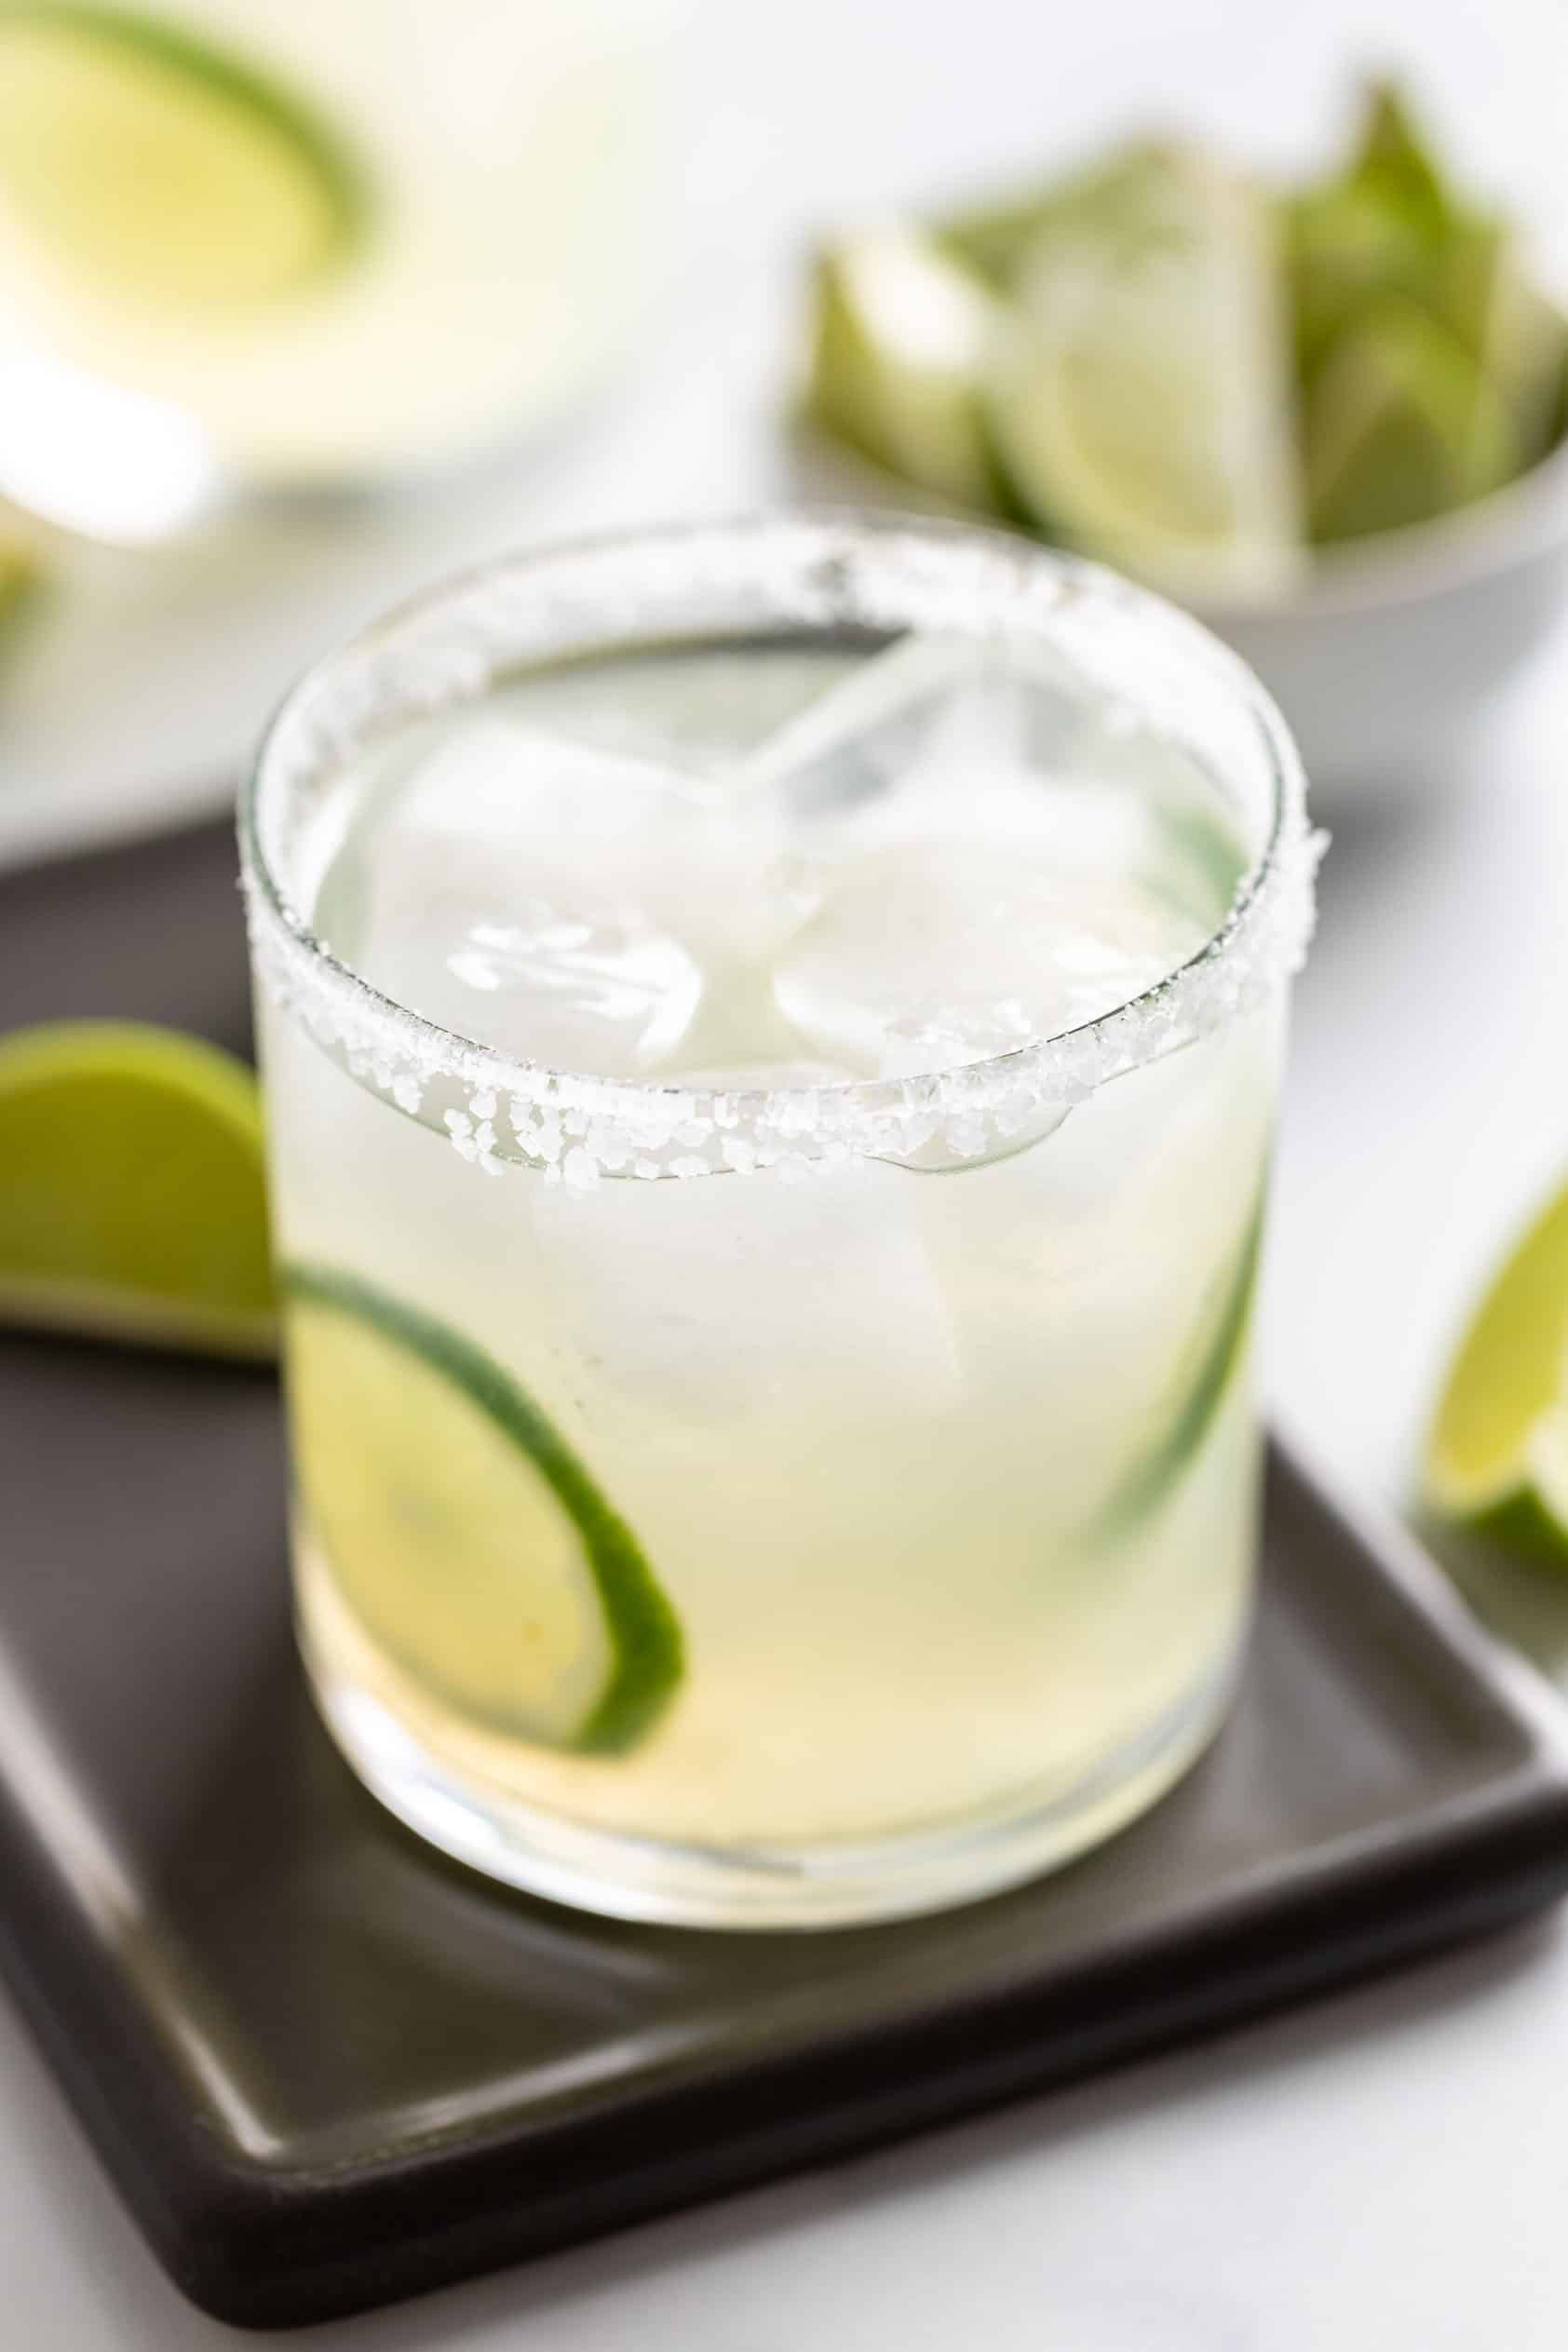 Cocktail with tequila and lime juice.